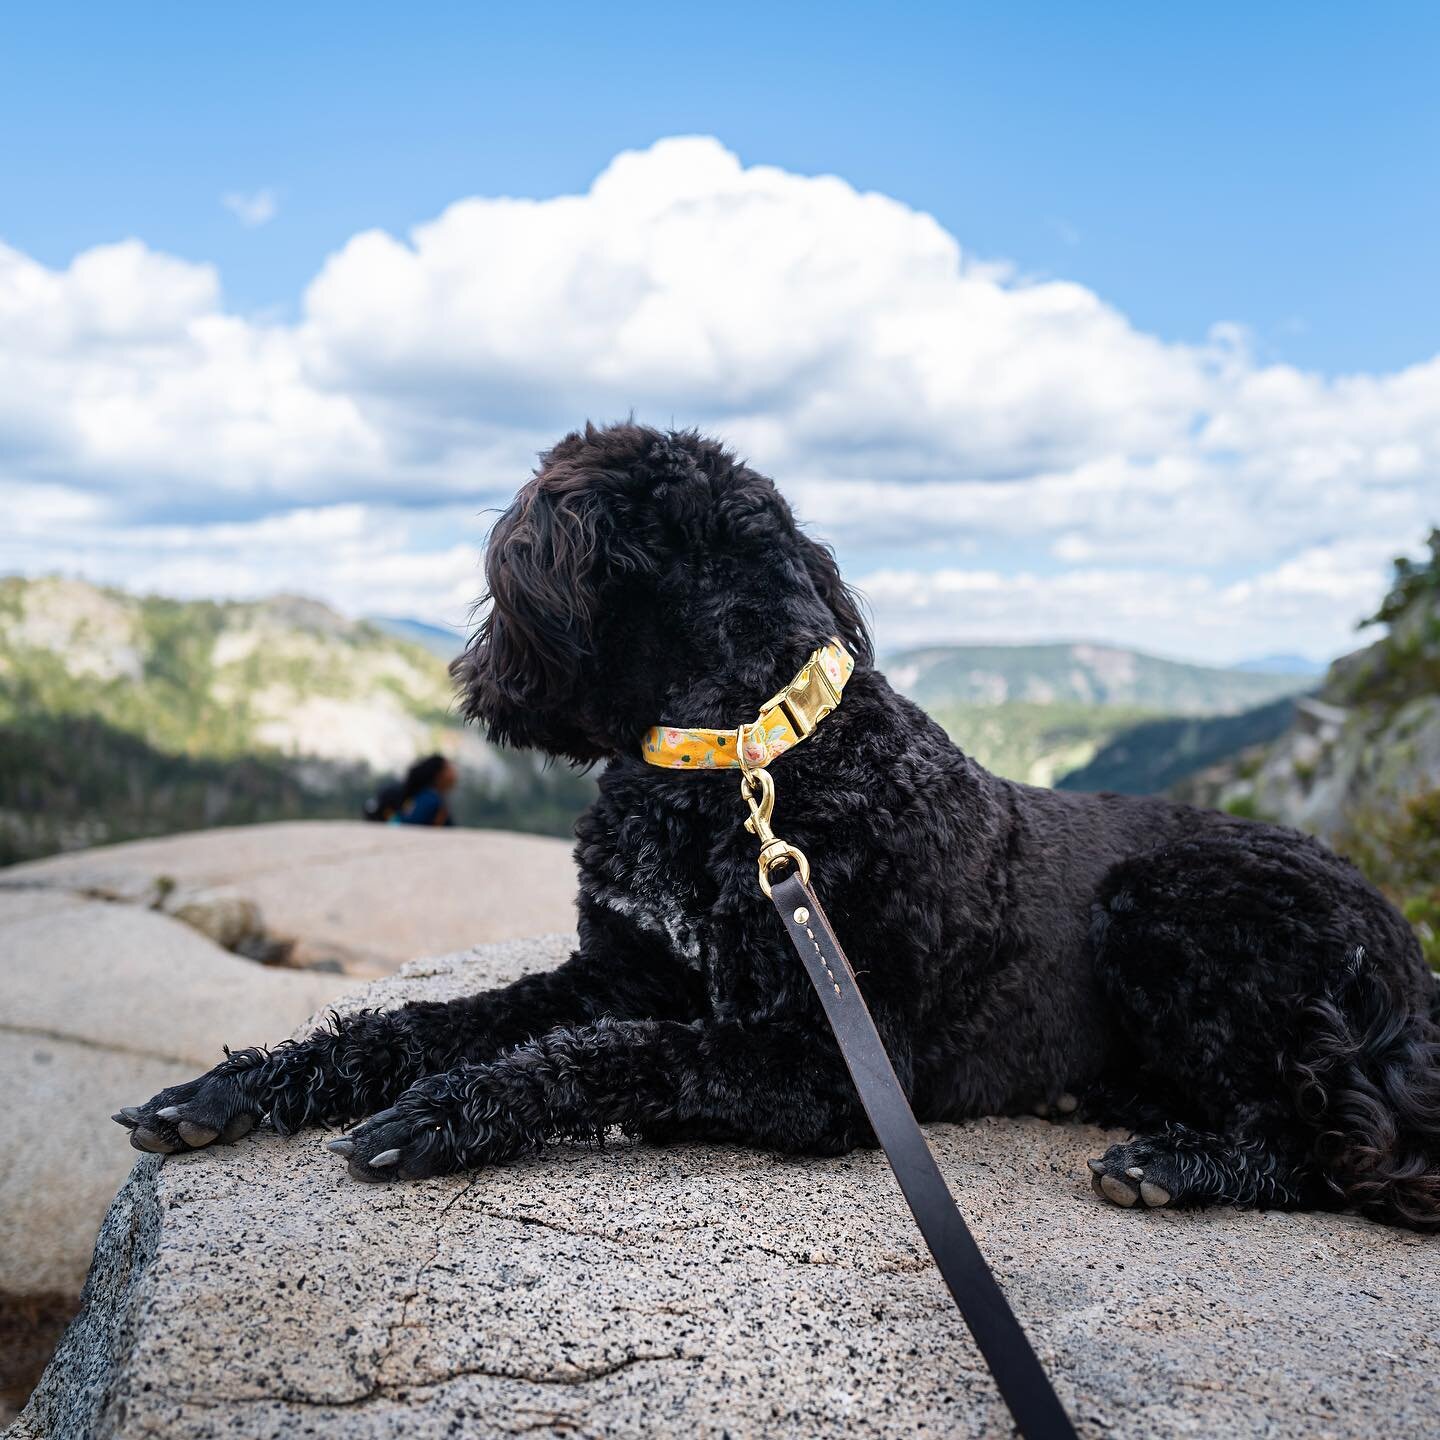 This rock looks like a good spot for a pit stop (say that a few times) on our hike up to high camp via Shirley Canyon Trail! 🥾🐕&zwj;🦺
.
.
.

#toraqportuguesewaterdogs #happydog #fluffygirl #portugesewaterdog #pwdsofinstagram #pwd #waterdog #califo